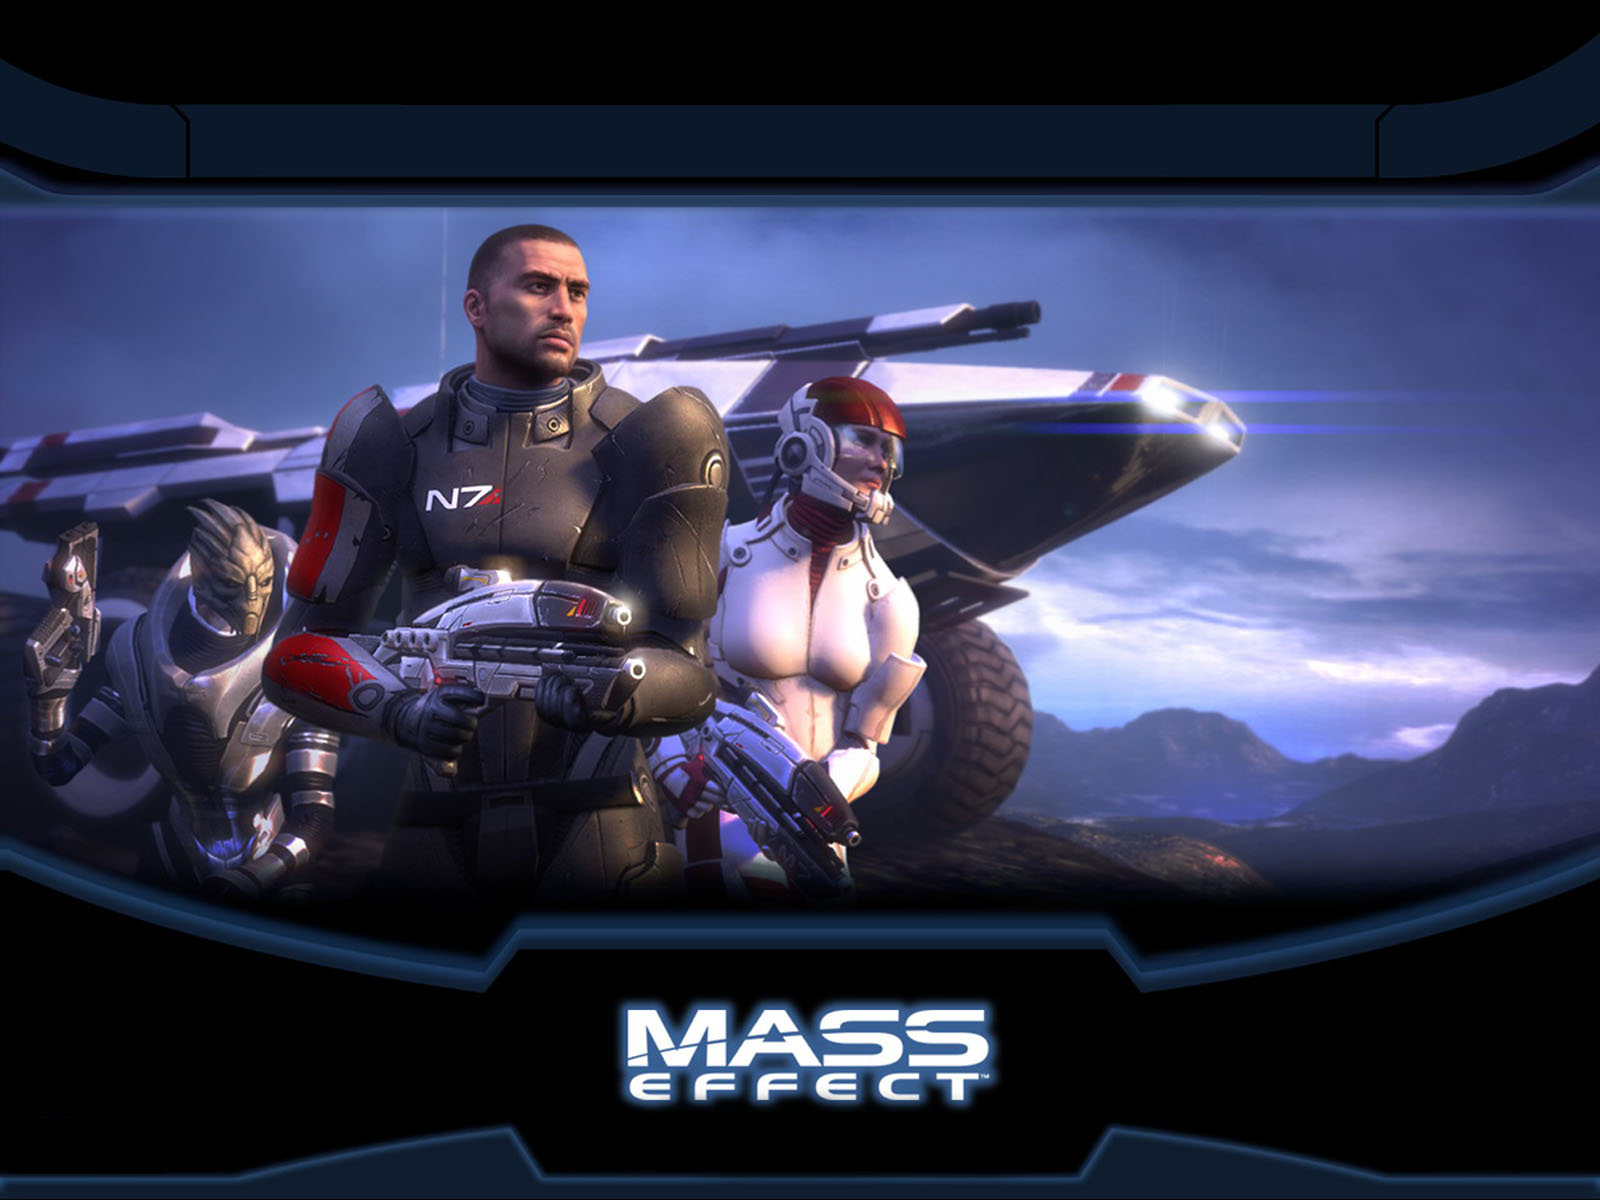 Mass Effect Game Wallpaper Is A Sequence Of Sci Fi Action